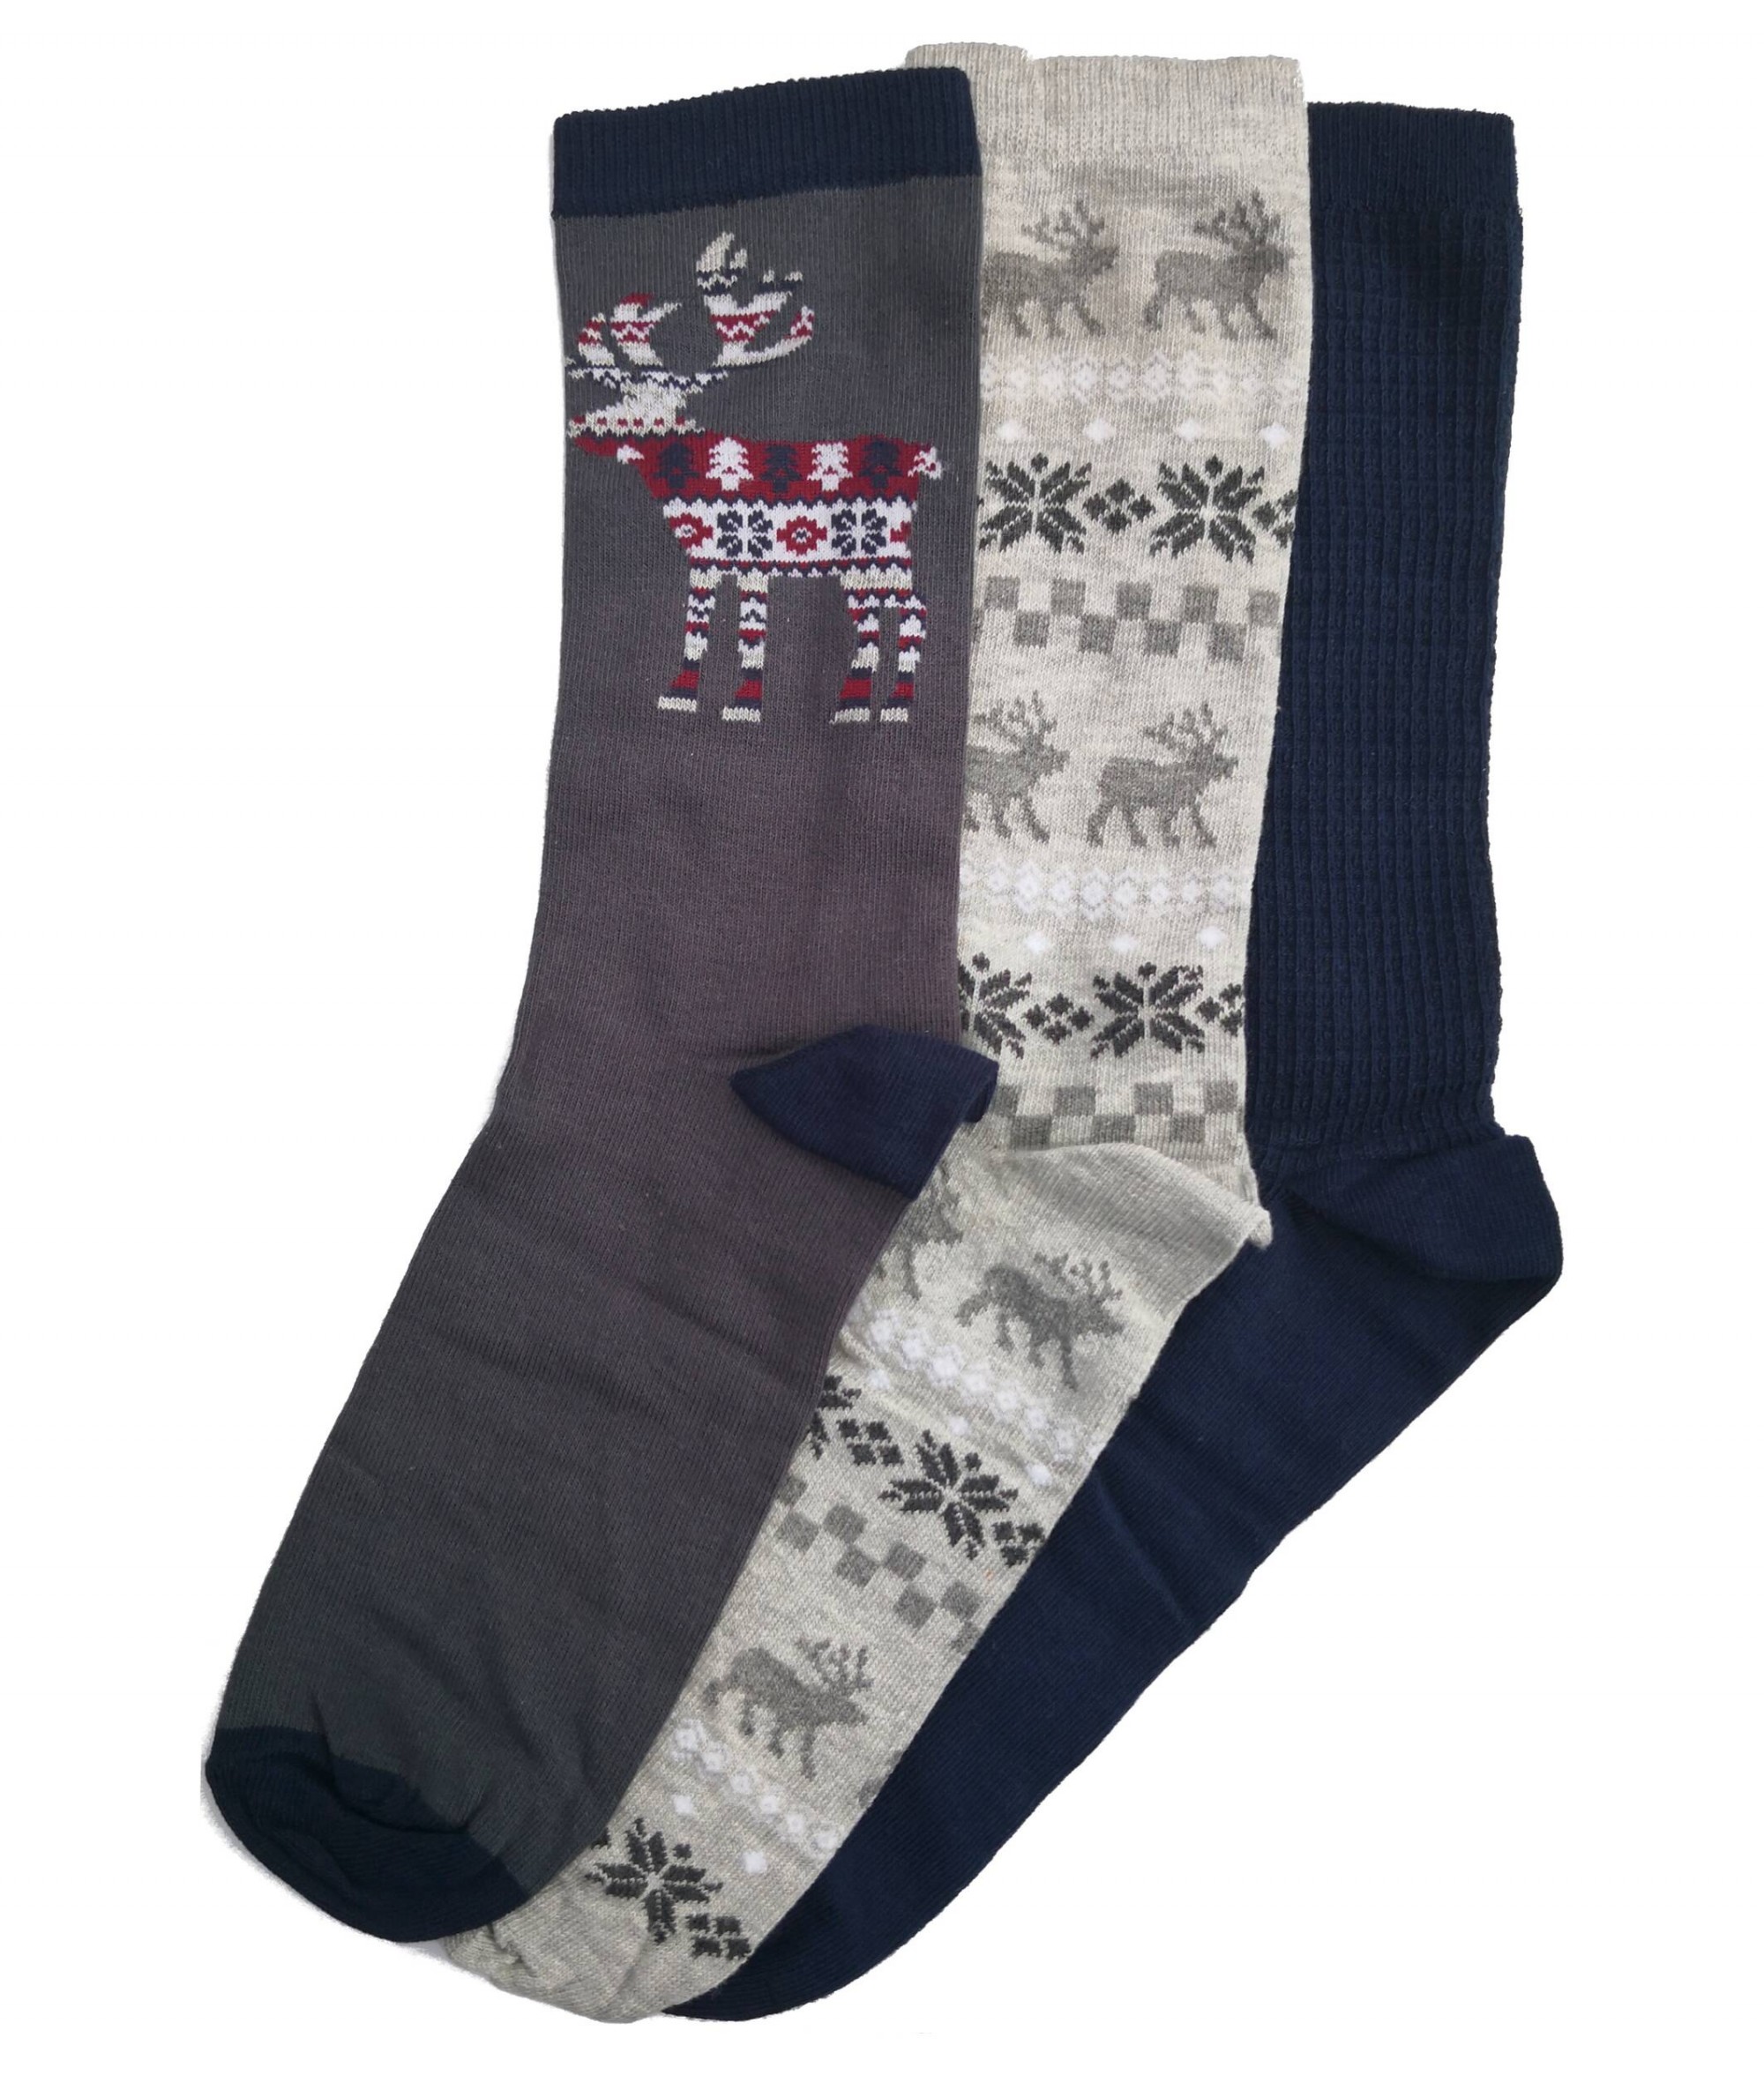 Totes Men's Ankle Socks 3 Pack - Stags | Cancer Research UK Online Shop